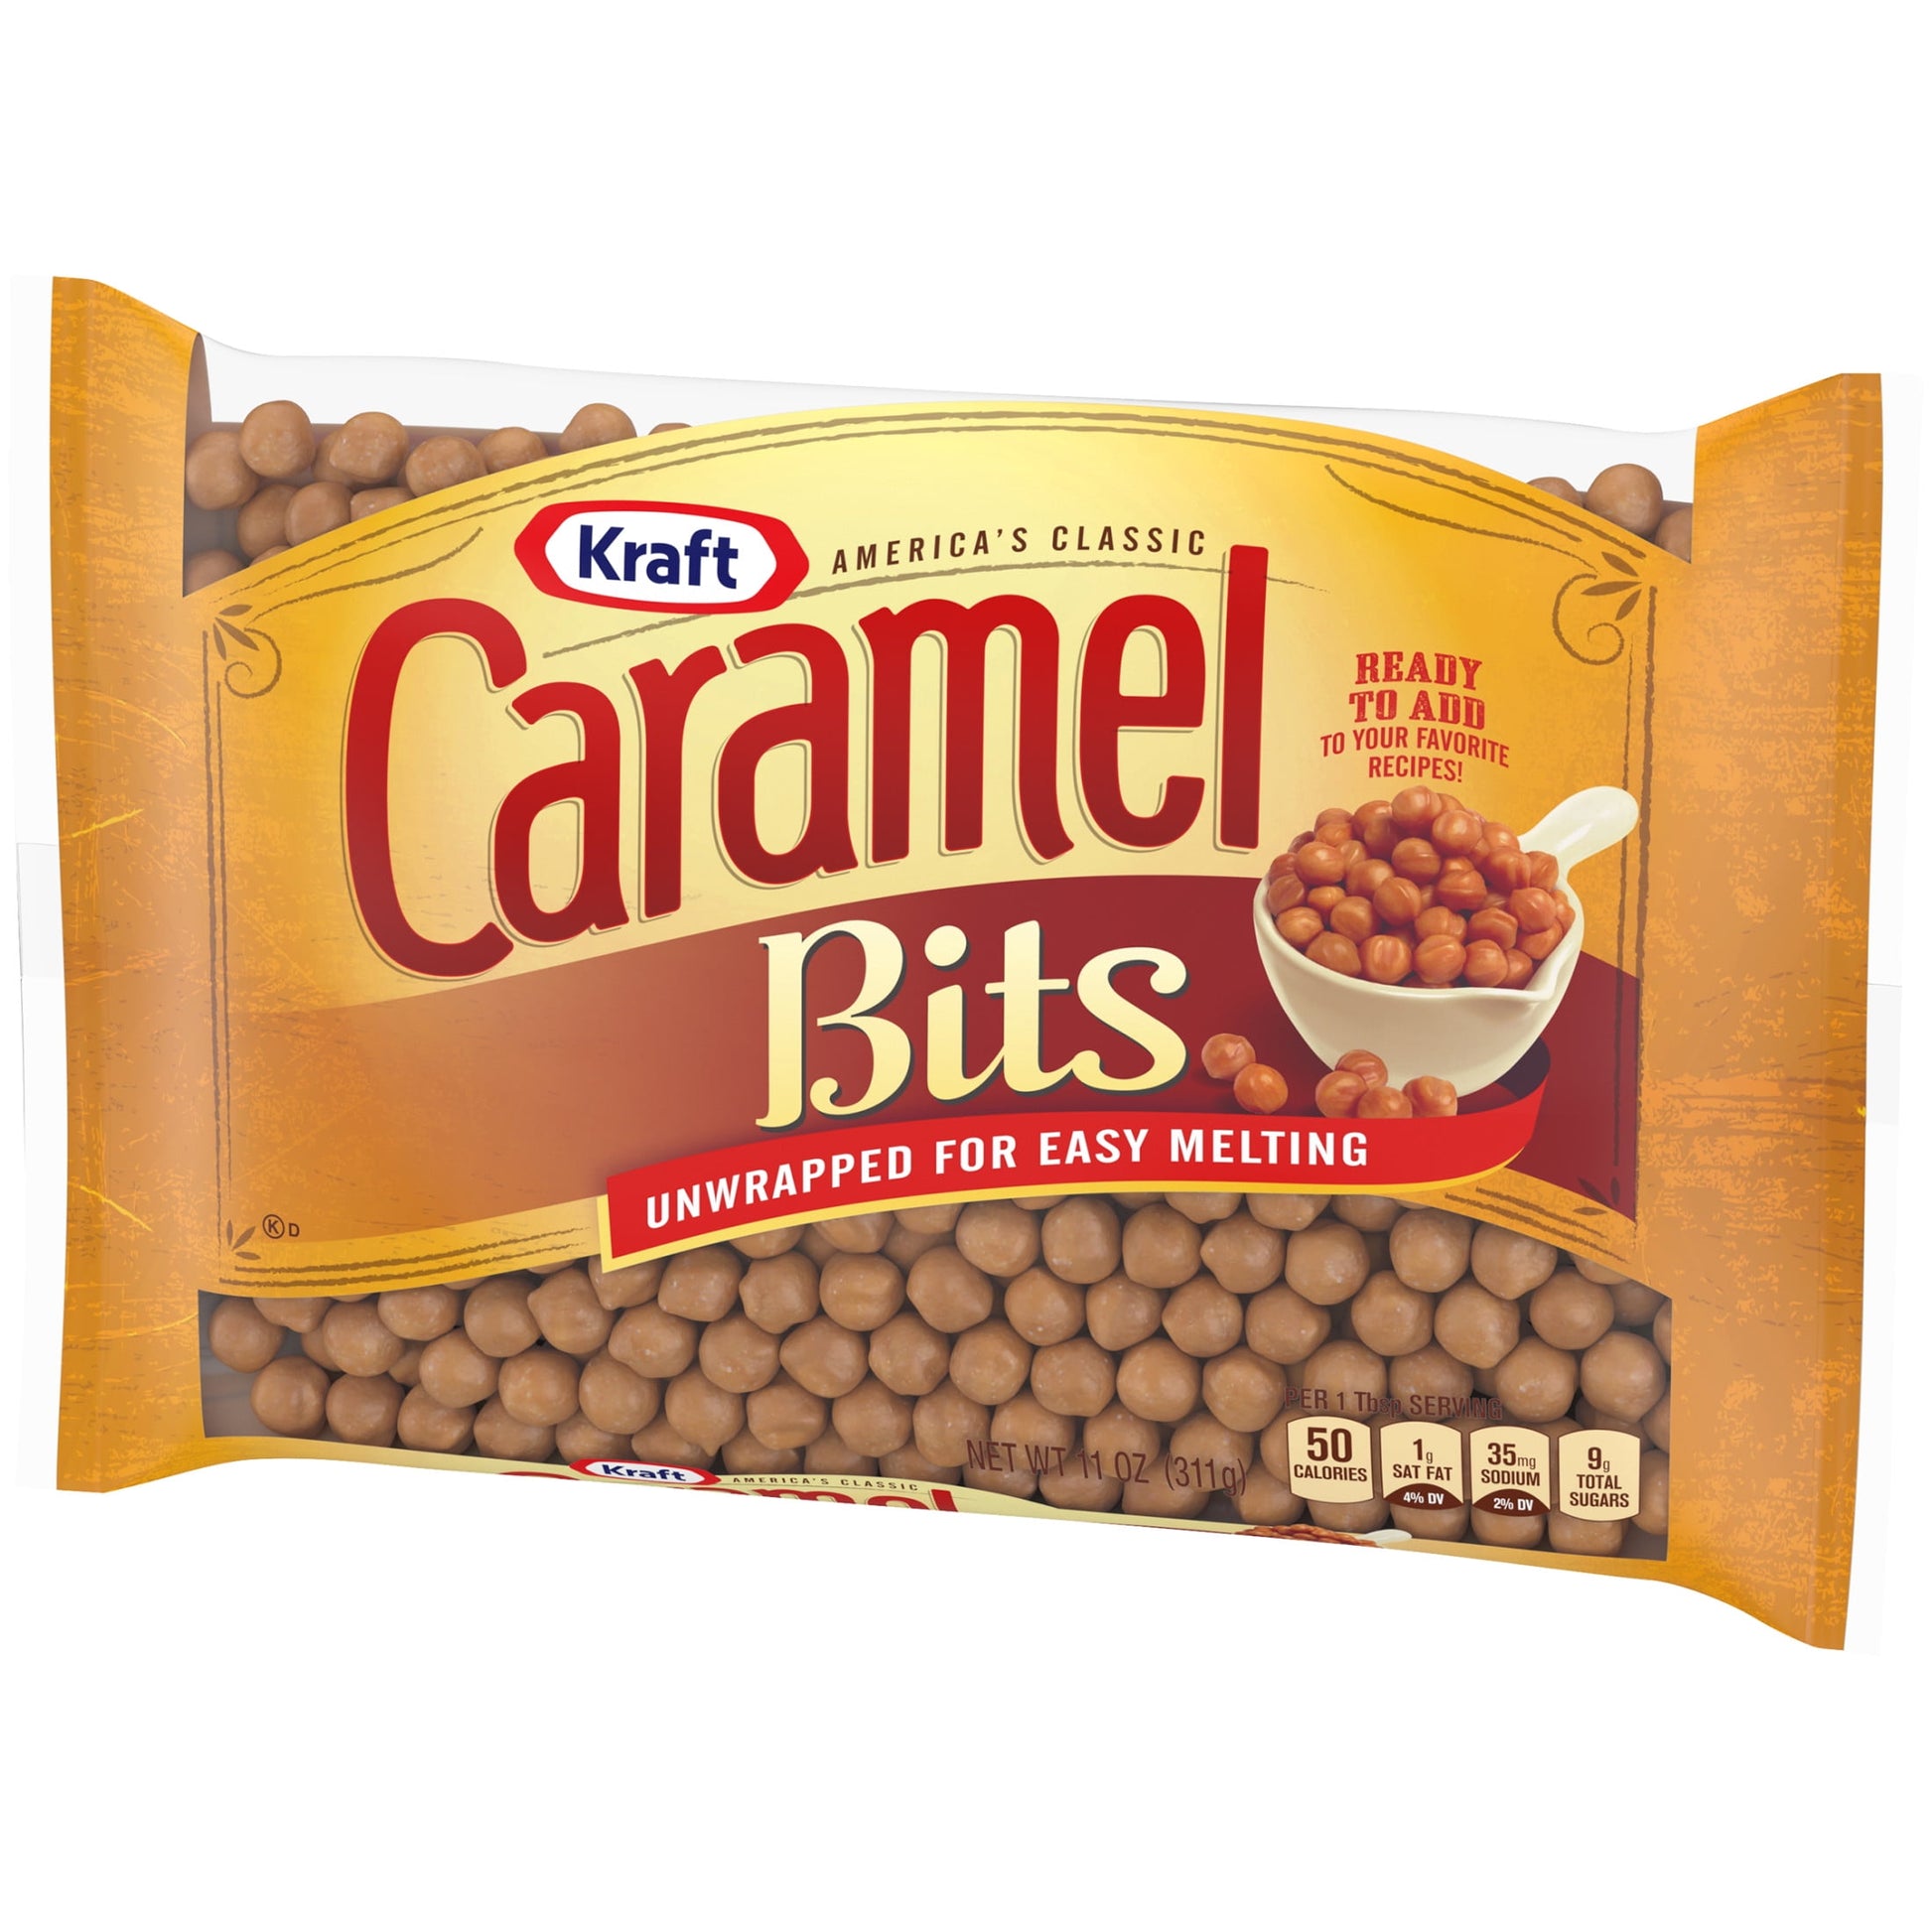 America'S Classic Unwrapped Candy Caramel Bits for Easy Melting, 11 Oz Bag